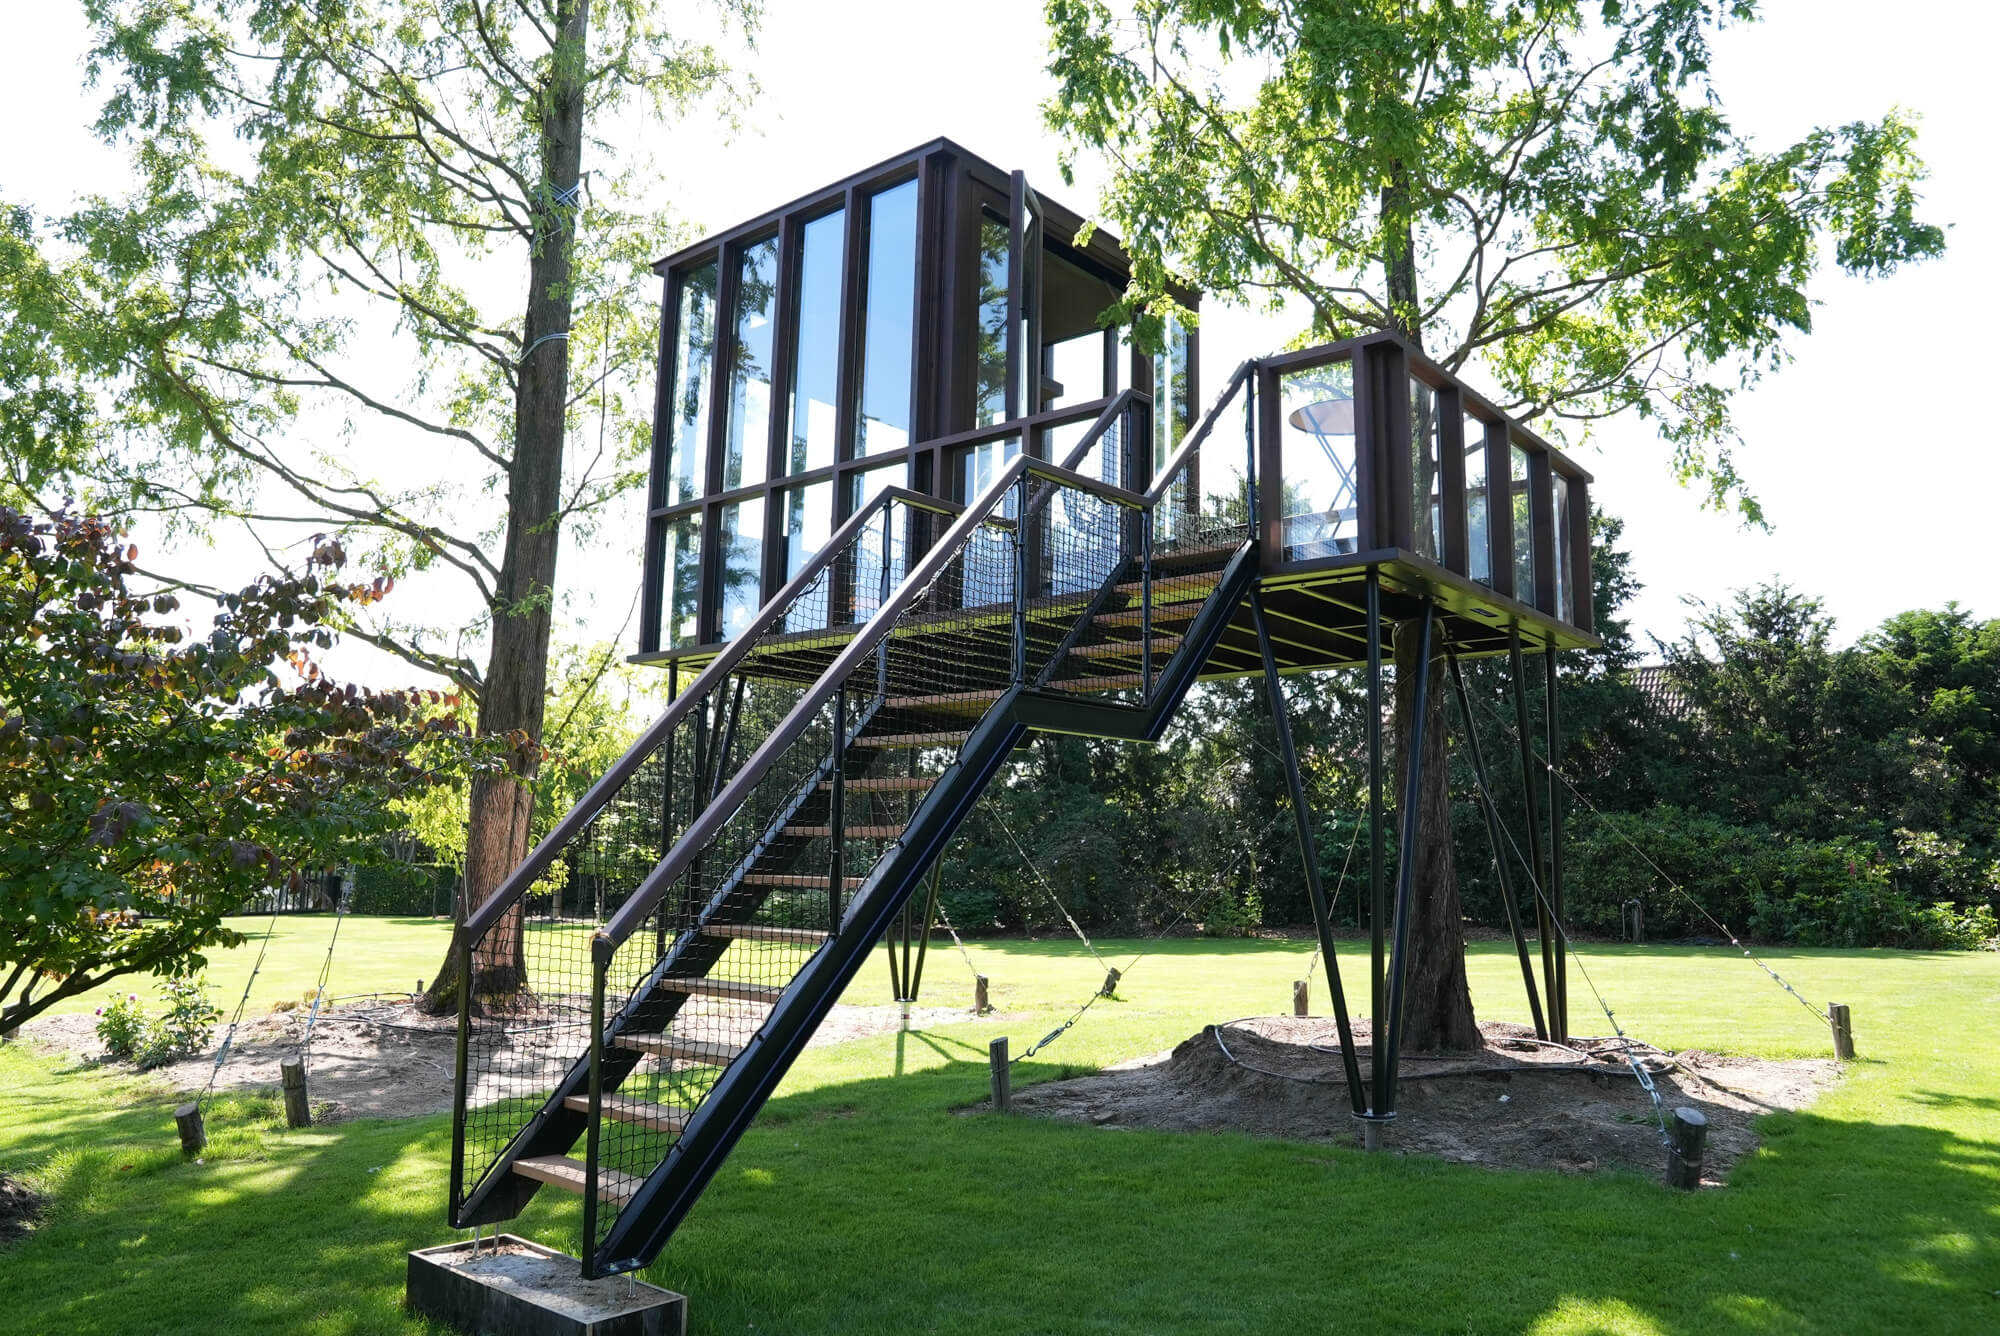 A sophisticated tree house finished using DuroGrit, a very durable exterior wood finish with incredible outdoor wood protection.